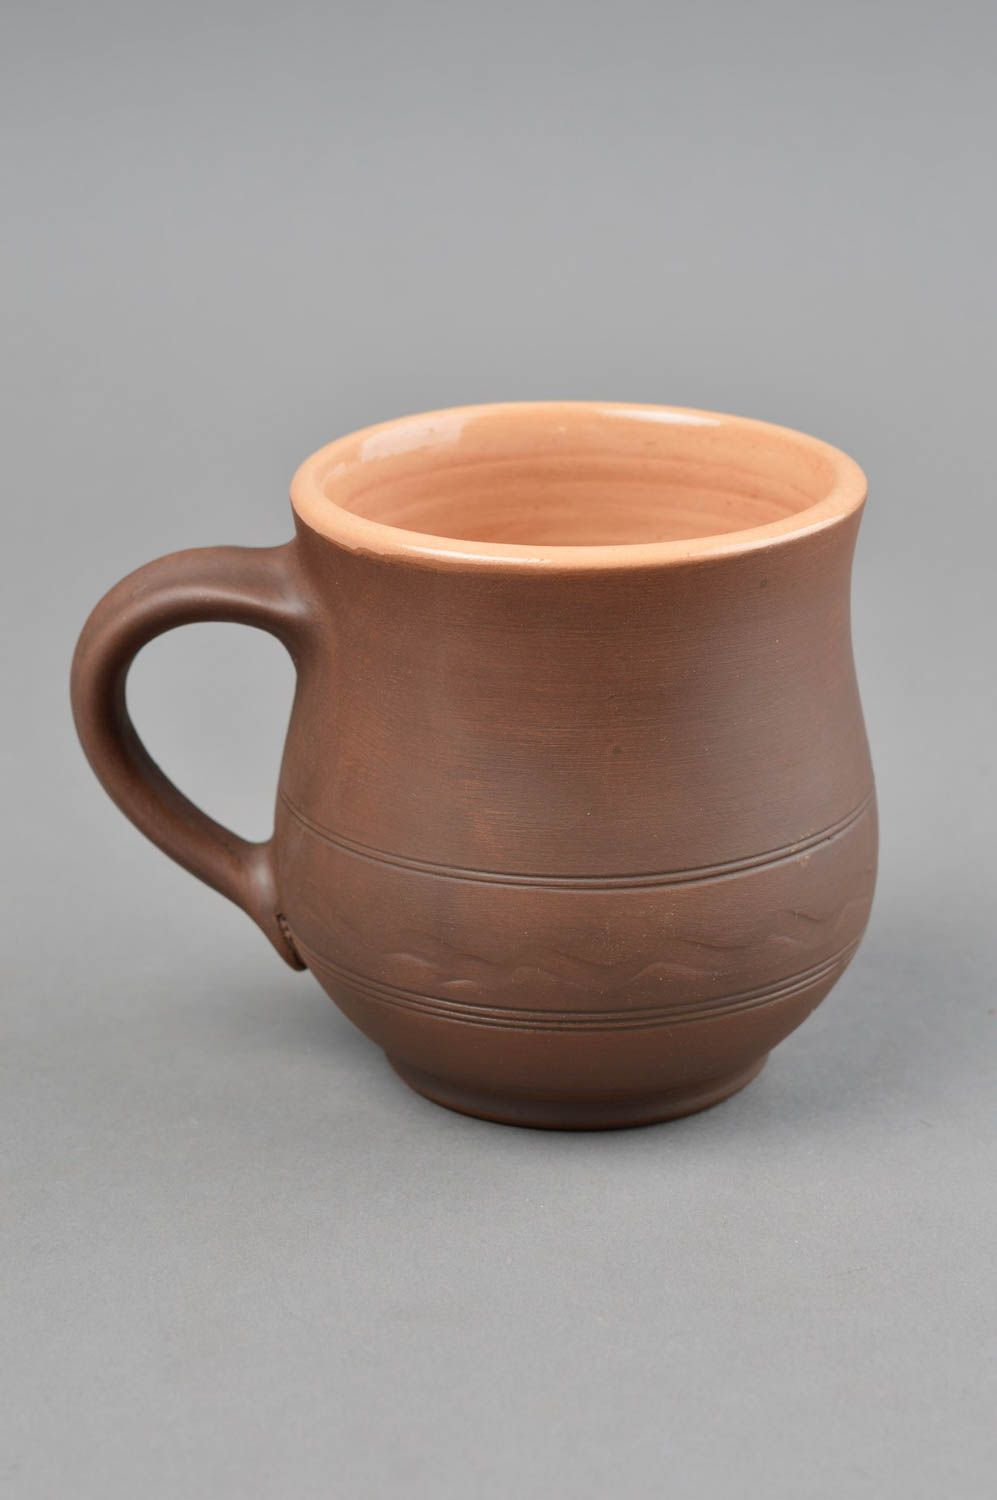 8 oz brown glazed coffee cup in pot shape with handle and classic rustic pattern photo 2